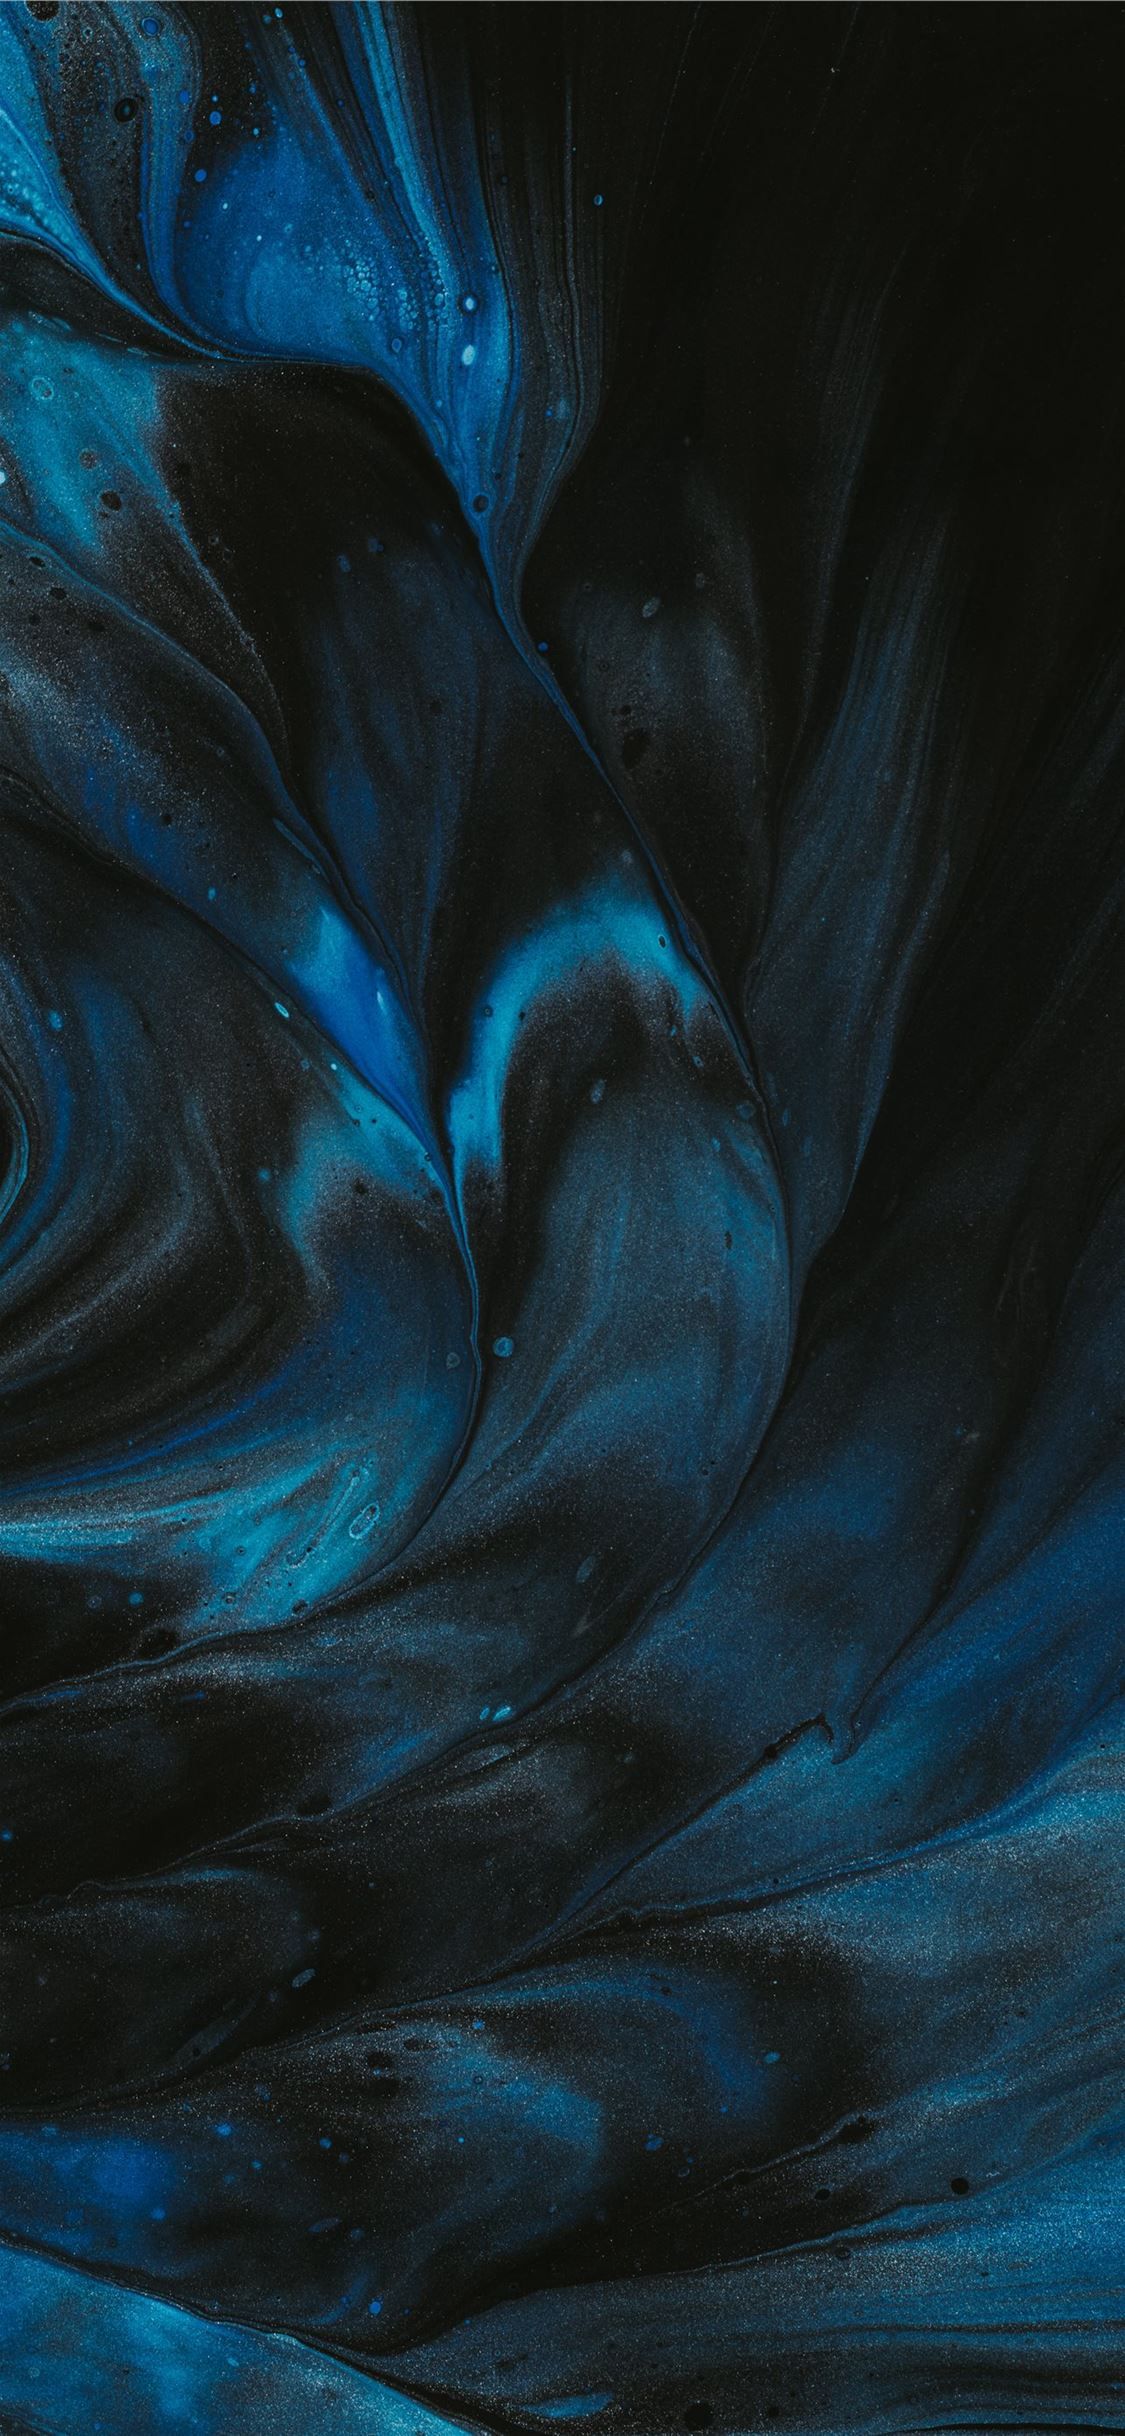 Blue and black paint swirled together to create a cool iPhone wallpaper - Dark blue, navy blue